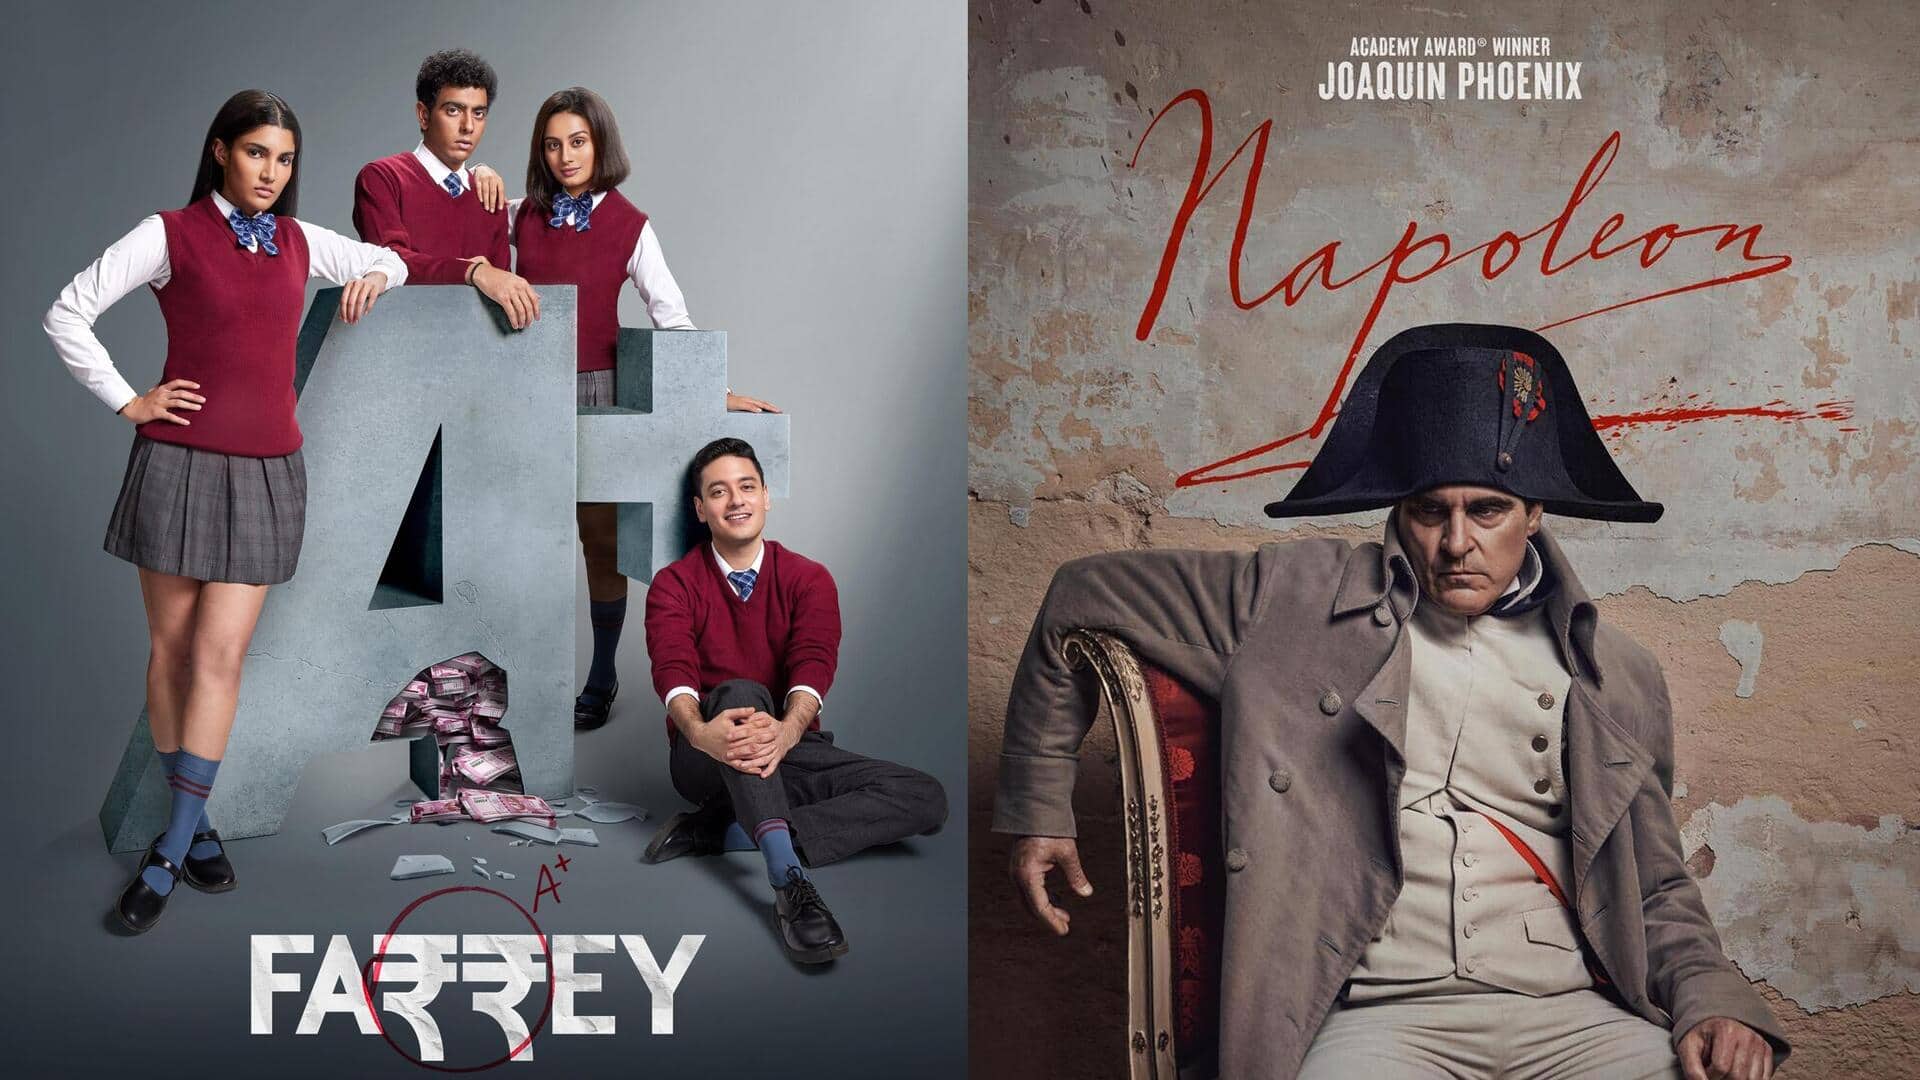 'Napoleon' to 'Farrey': What to watch in theaters this week